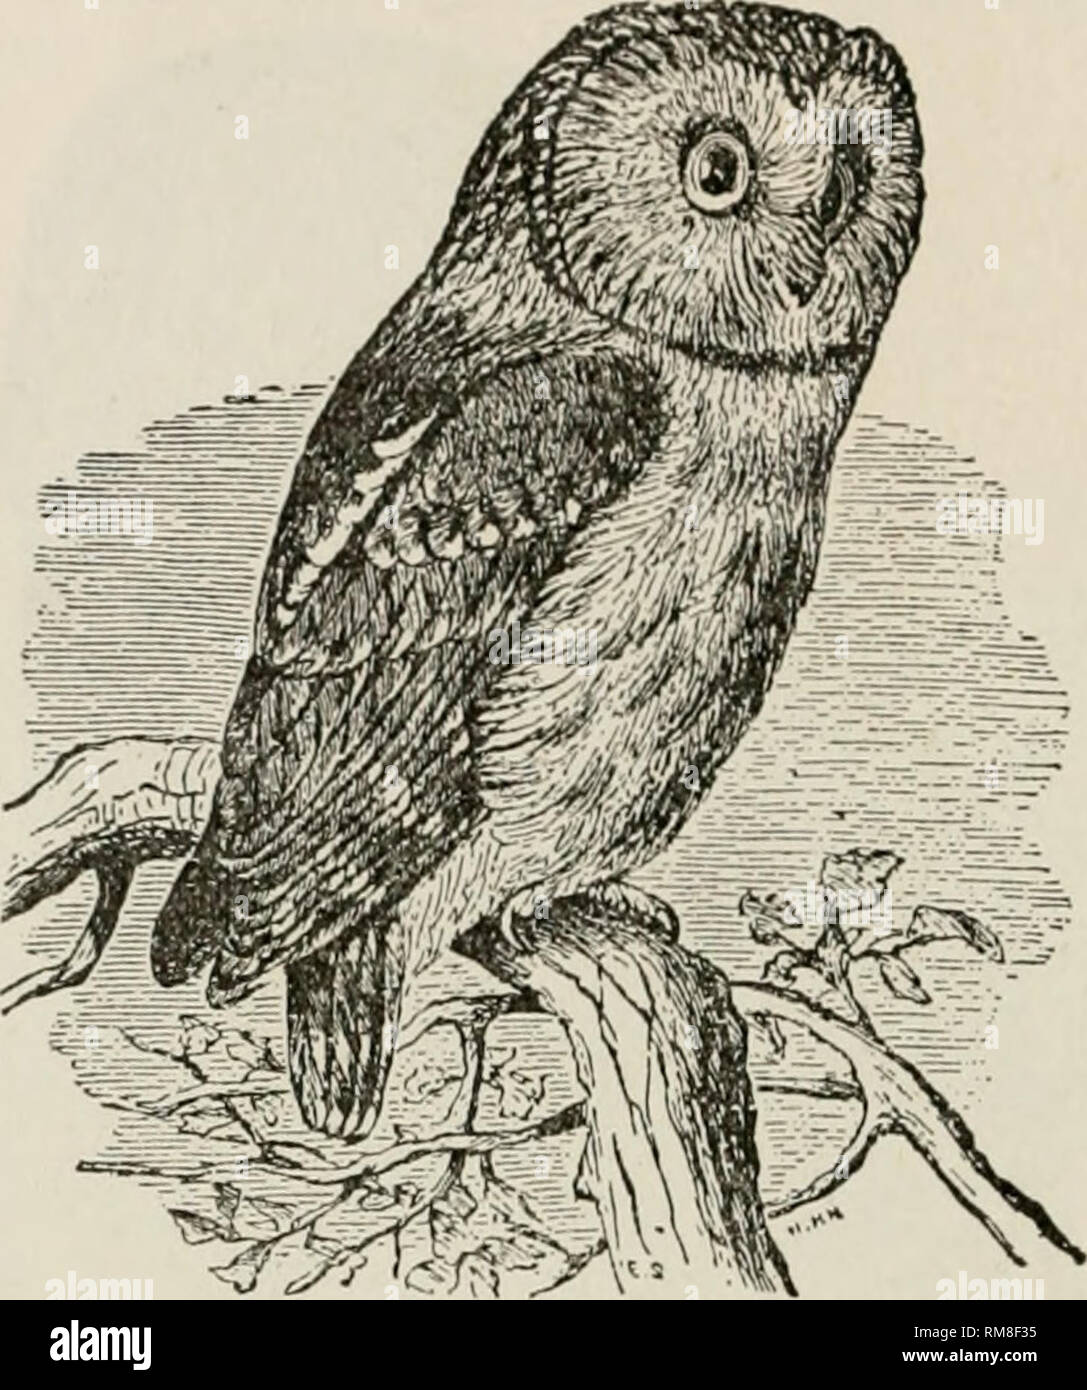 . Annual report of the Nebraska State Horticultural Society. Horticulture -- Nebraska. 100 NEBRASKA STATE HOUTICUI.TURAL SOCIETY. 375a. Bubo virginianus subarcticus(//o?/).—Western Horned Owl. West Point (L. Bruner); &quot;eastward across the Great Plains&quot; (Bendire); &quot;East across the Great Plains to western Texas and western Manitoba &quot; (Goss); do. (Fisher); Omaha (L. Skow); Cherry county (J. M. Bates); Sioax county, Feb. 26, 1896, several seen but not taken (W. D. Hunter, L. Skow).. Fig. -iG.—Saw-whet Owl. 3756. Bubo virginianus arcticus (Swains.).—Arctic Horned Owiv. West Point Stock Photo